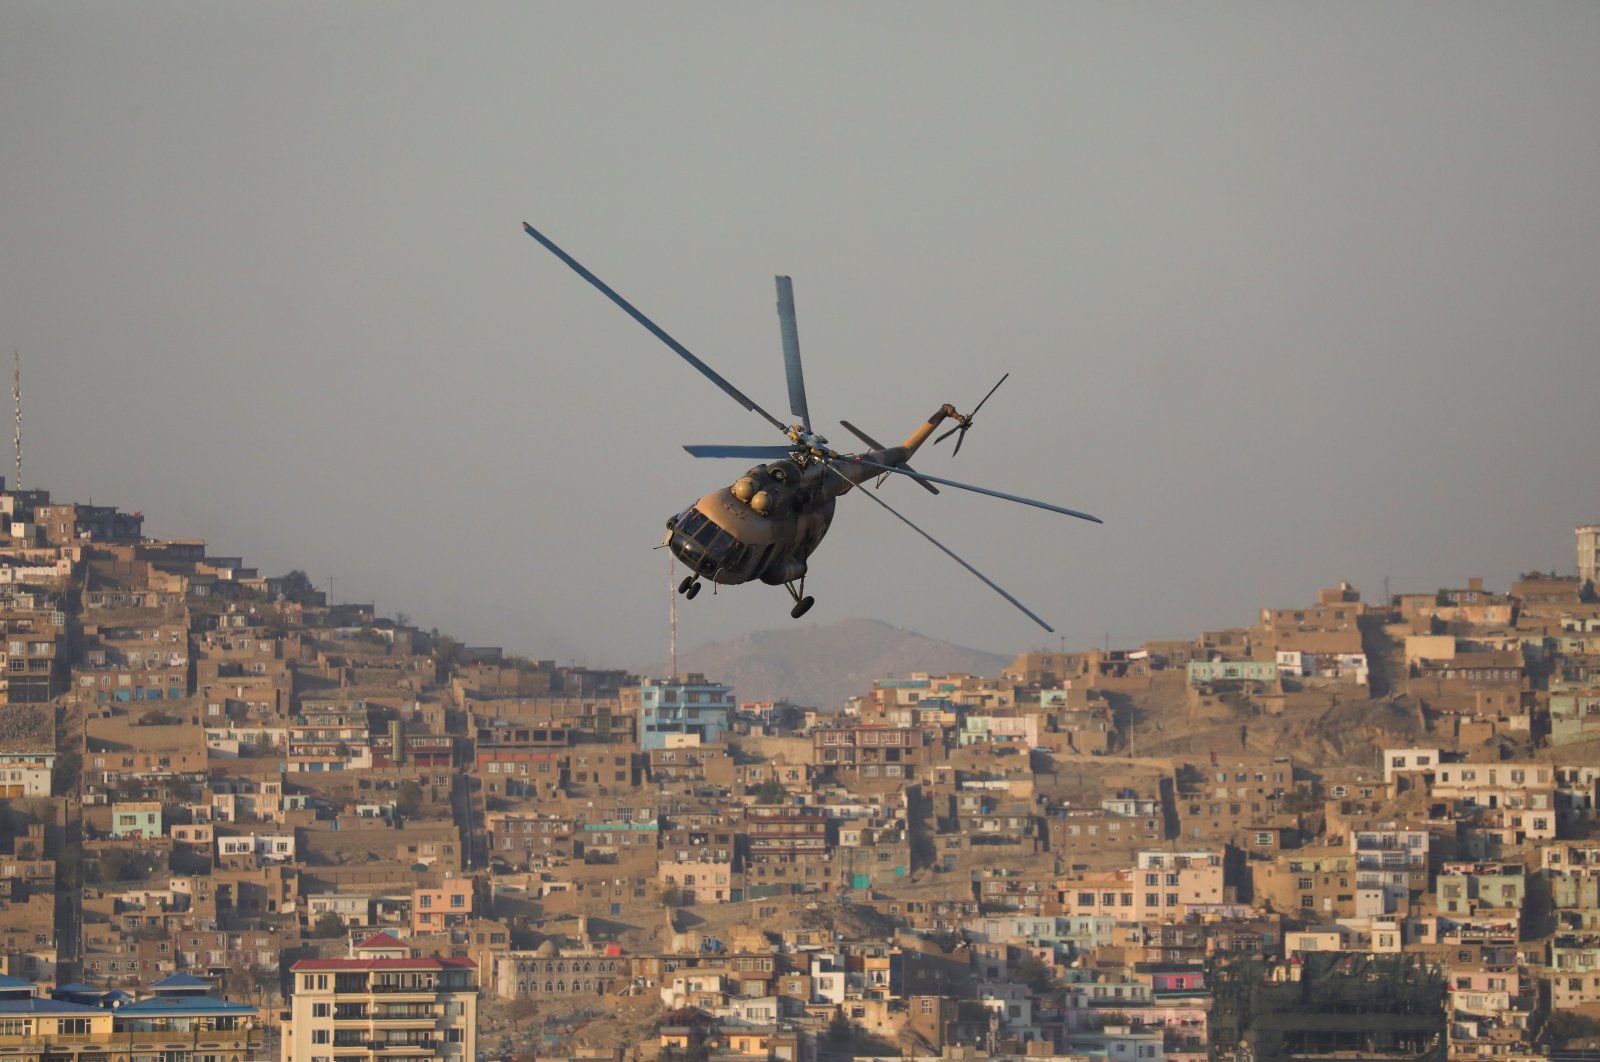 A military helicopter is pictured during the Taliban military parade in Kabul, Afghanistan, Nov. 14, 2021. (Reuters Photo)